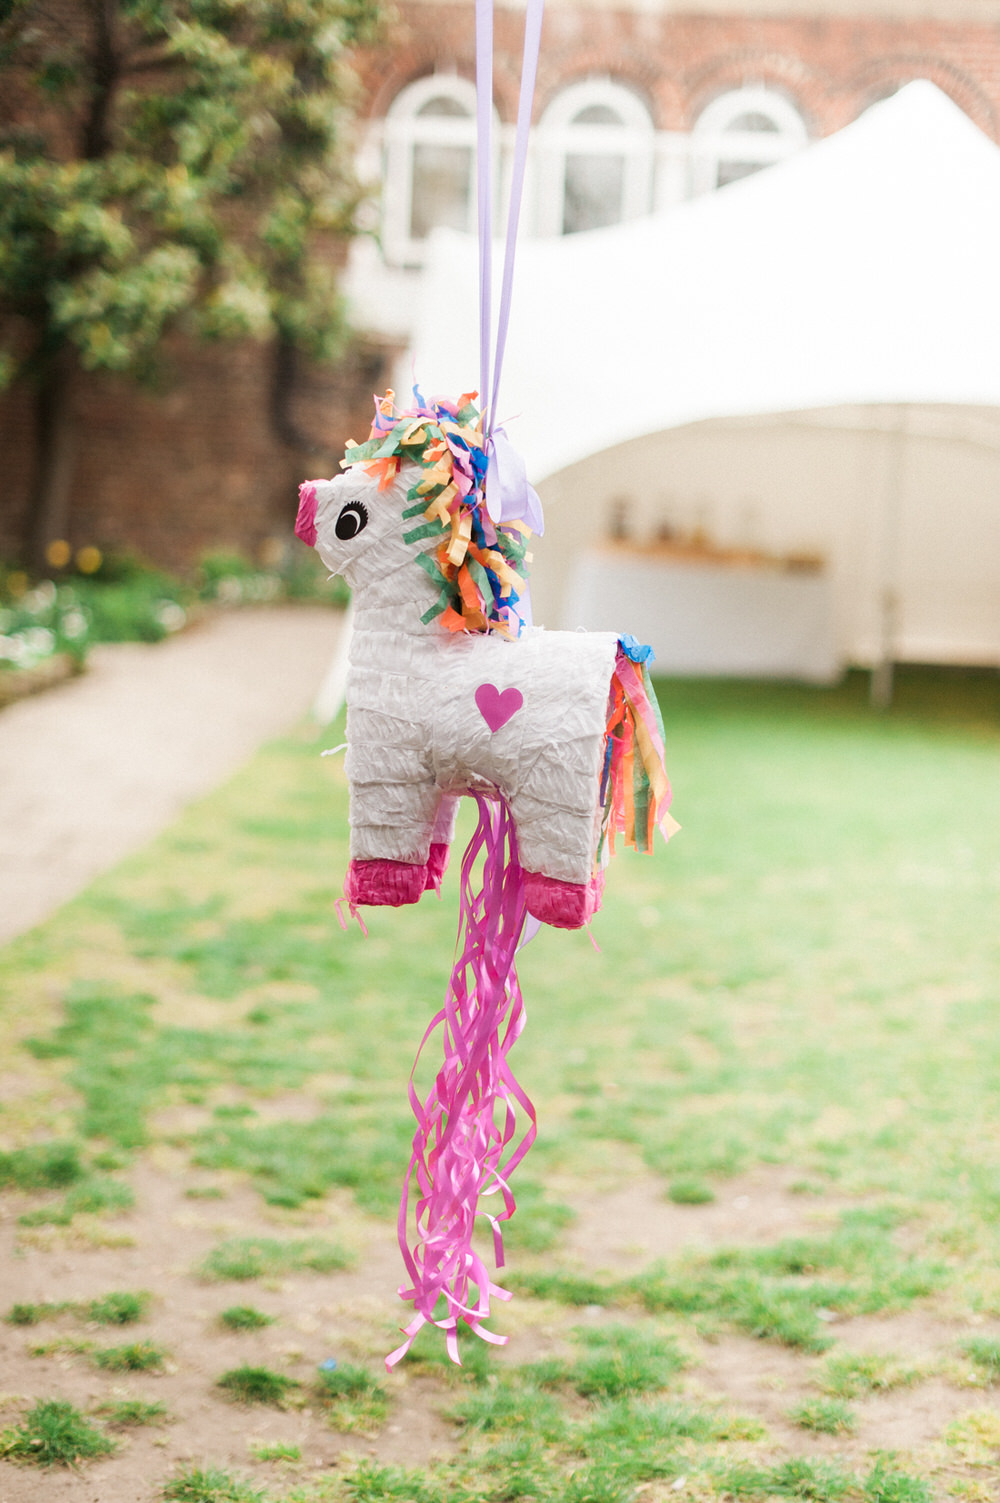 Pinatas | Unicorn Piñata | A Midsummer nights dream inspired children's birthday party with stunning floral, fairy entertainment, crafts and a picnic. Photos by Kate Nielen.